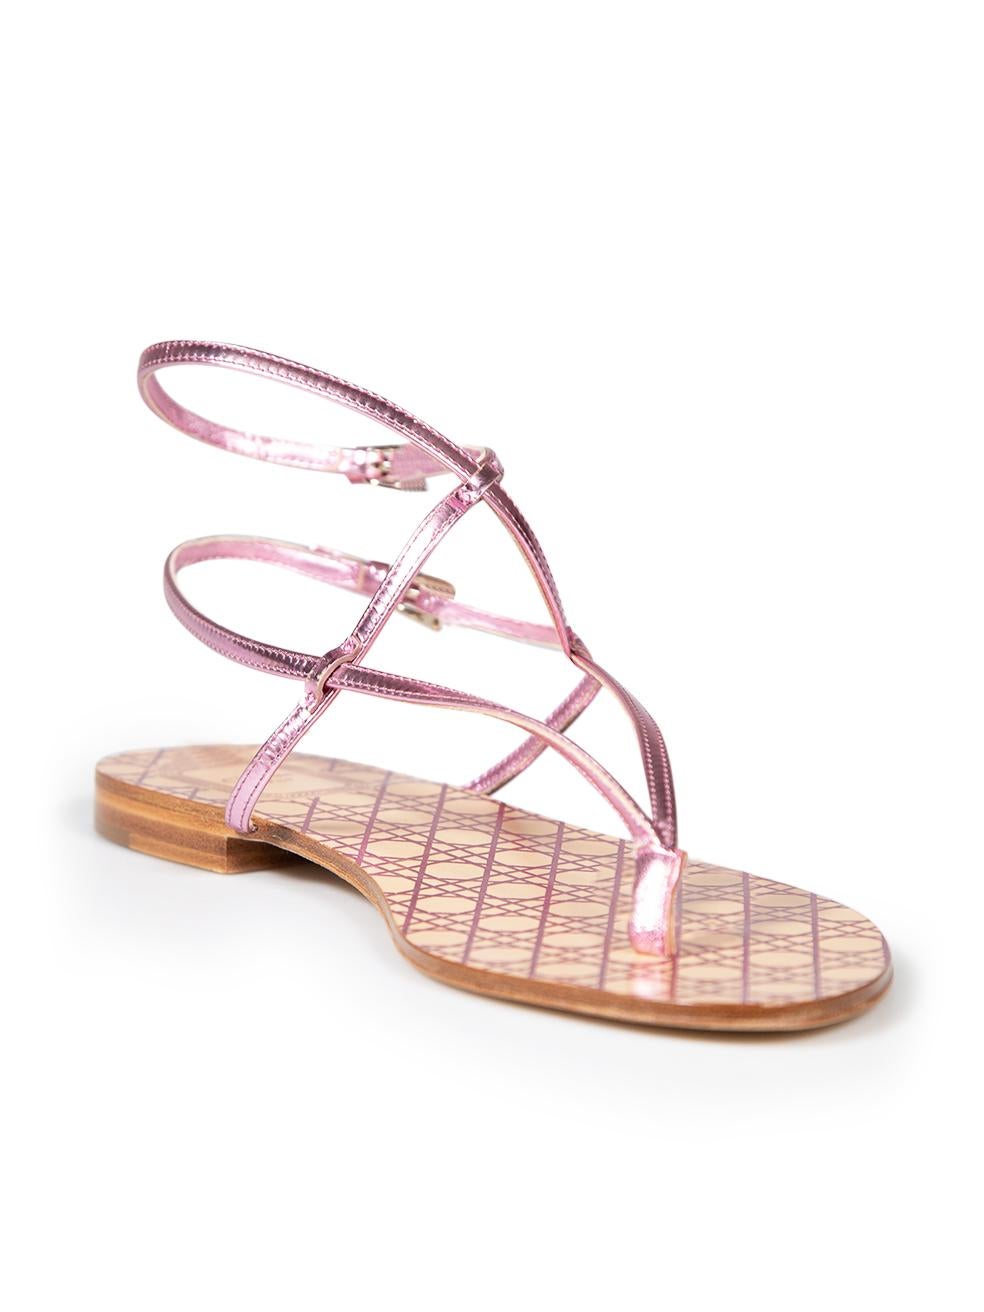 CONDITION is Very good. Minimal wear to sandals is evident. Minimal indent to tip of left sole on this used Dior designer resale item. This item comes with original dust bag.
 
 
 
 Details
 
 
 Pink
 
 Leather
 
 Thong sandals
 
 Open toe
 
